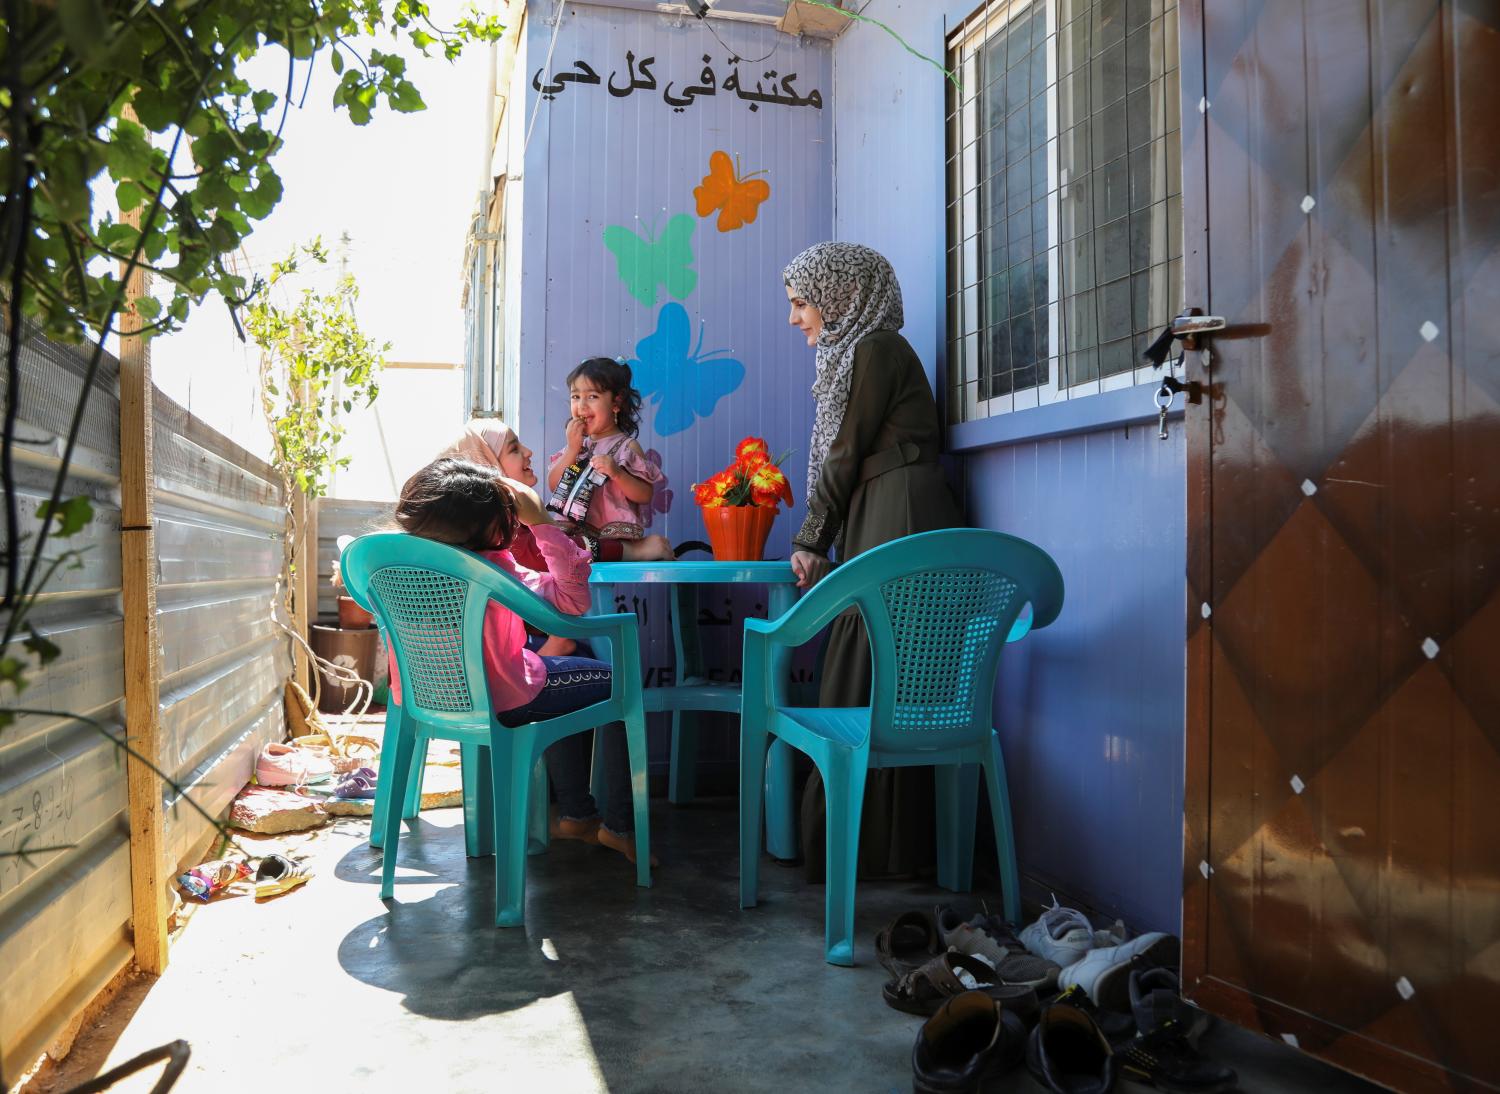 Asmaa Rasheed, a Syrian refugee storyteller living in Zaatari refugee camp, chats with her daughters, at the camp, in the Jordanian city of Mafraq, near the border with Syria, Jordan June 17, 2021. Picture taken June 17, 2021. REUTERS/Alaa Al Sukhni